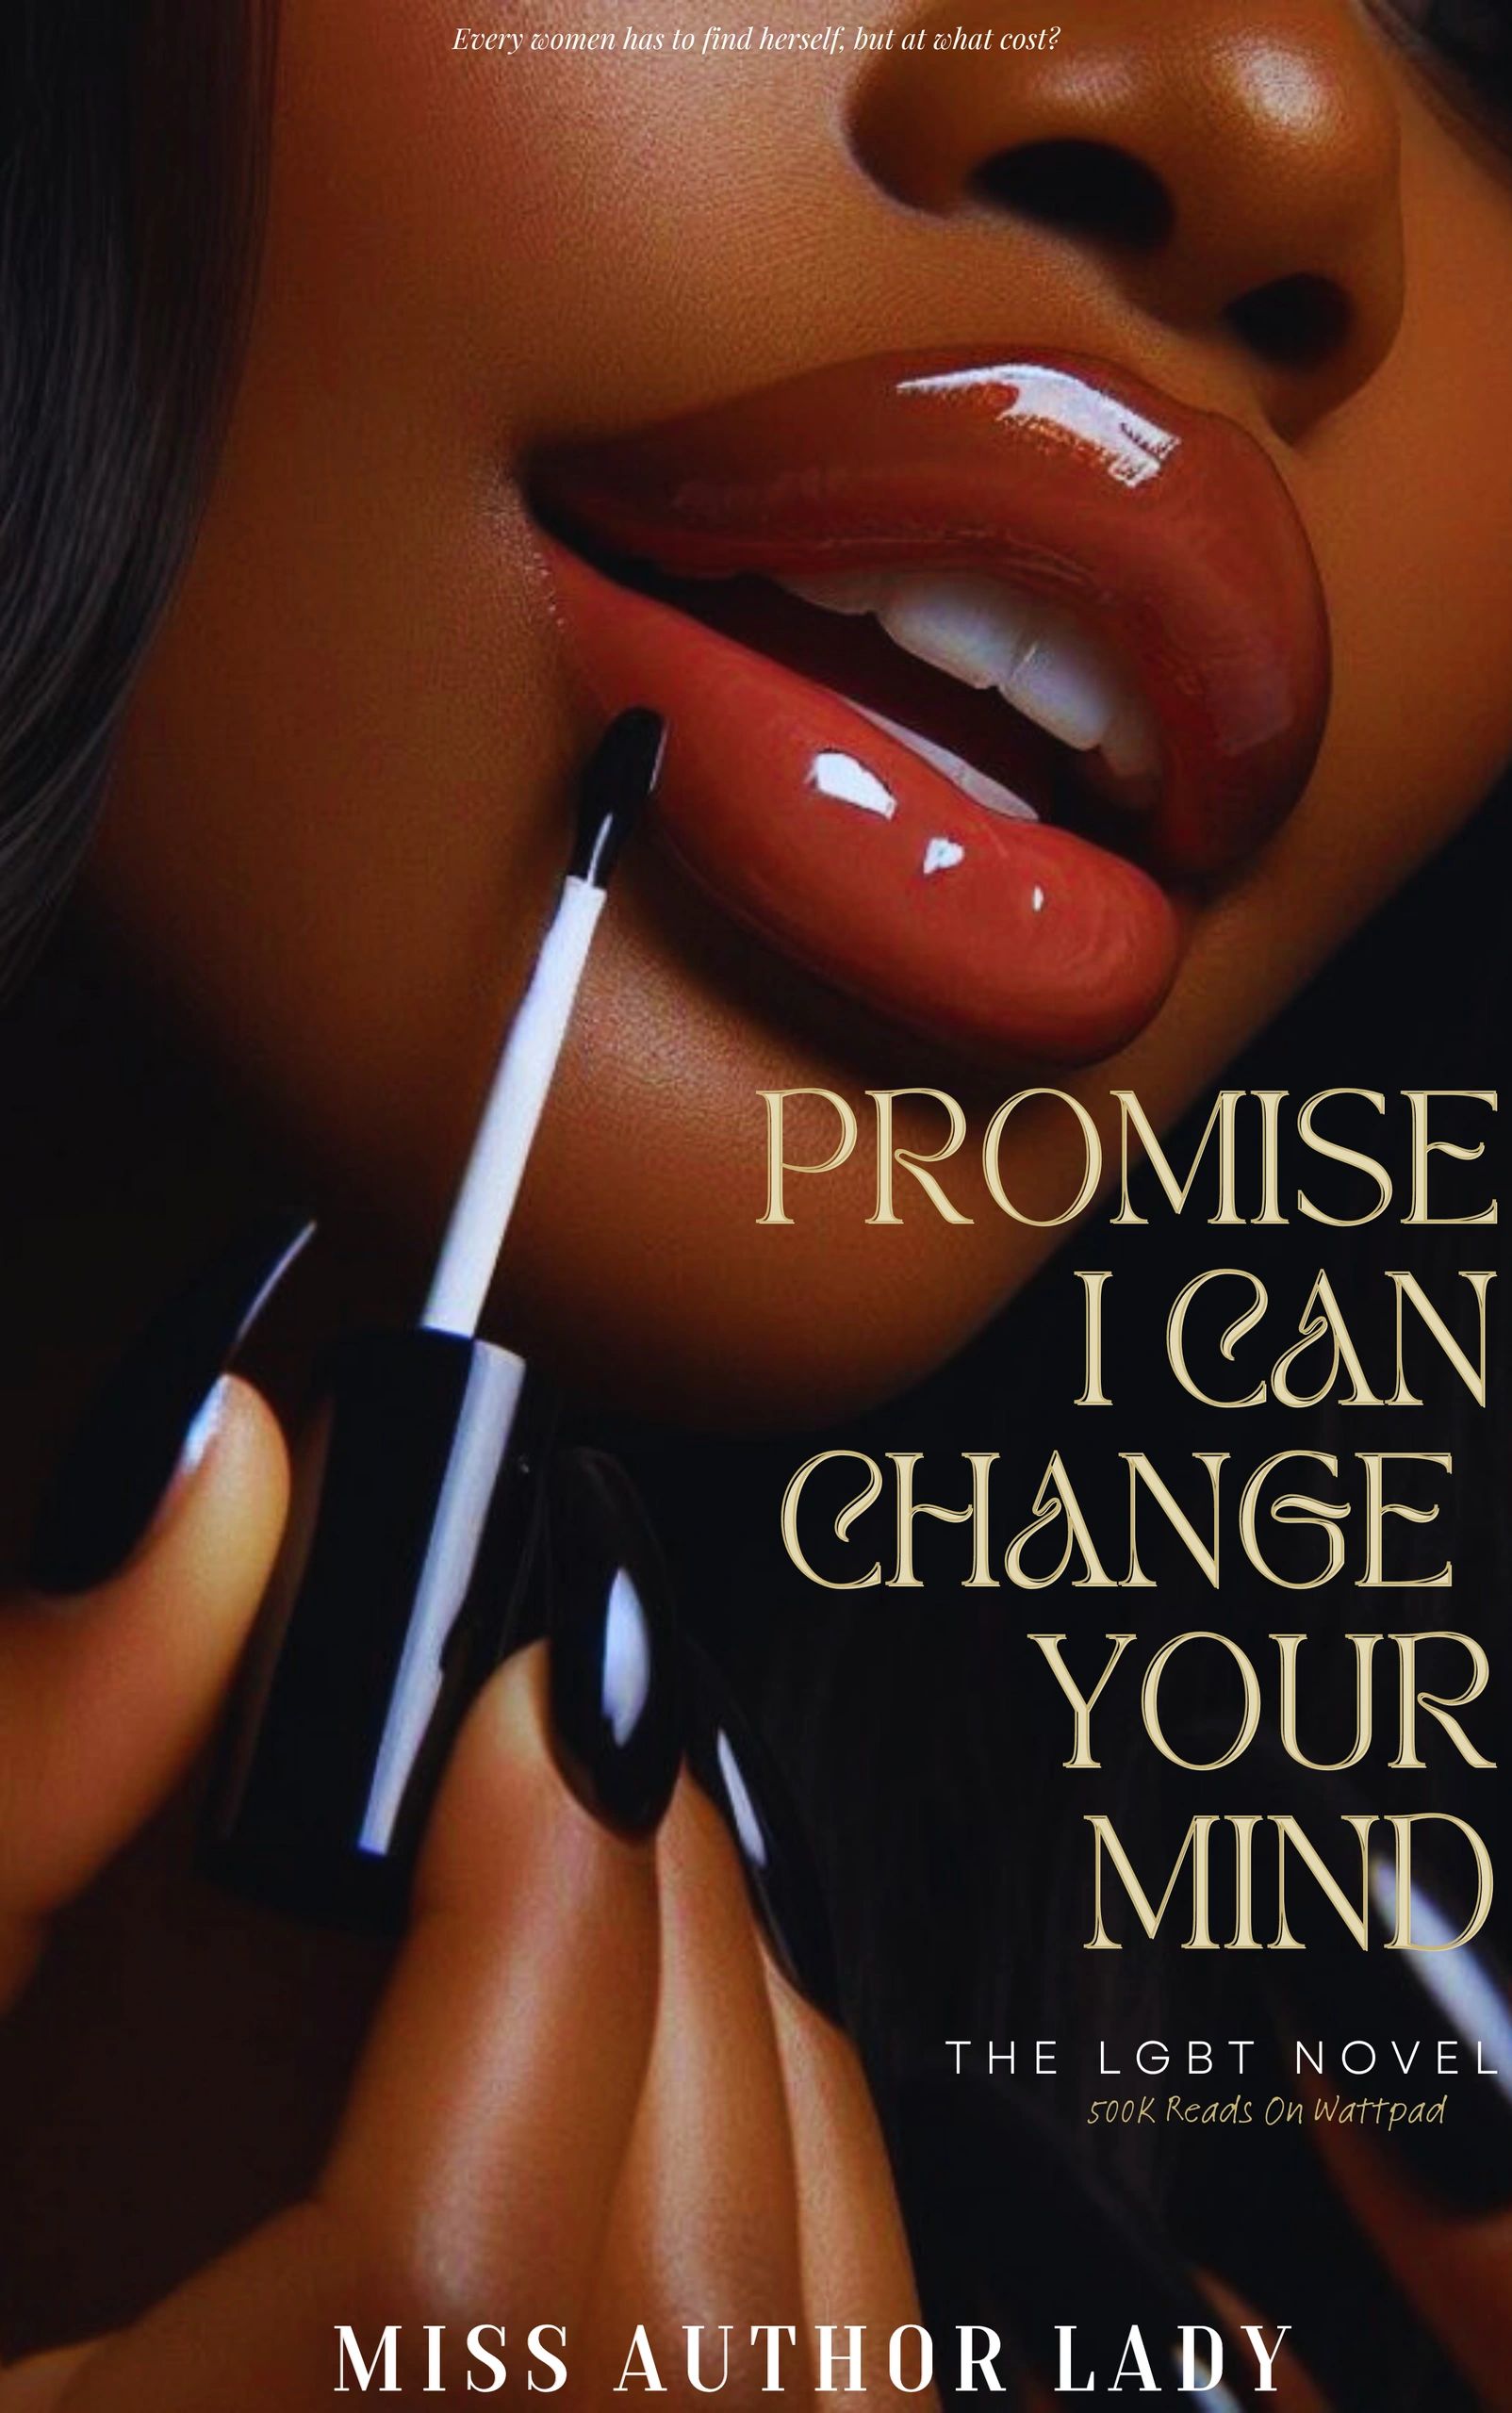 Cover of Promise I Can Change Your Mind.
Miss Author Lady, WLW Books